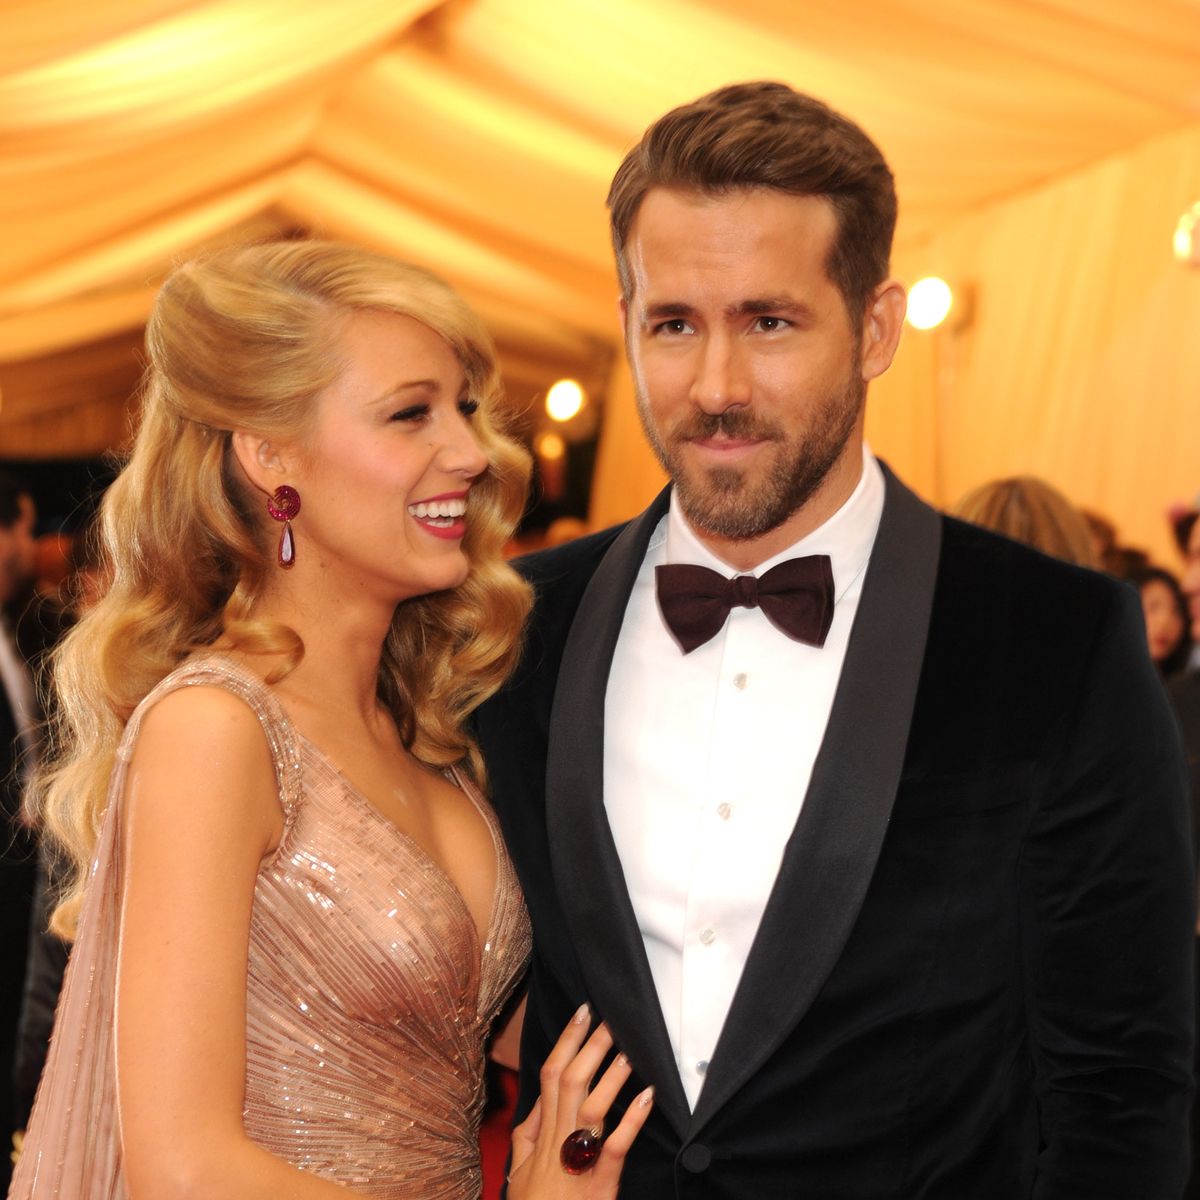 Ryan Reynolds: Friend tried to sell pictures of daughter